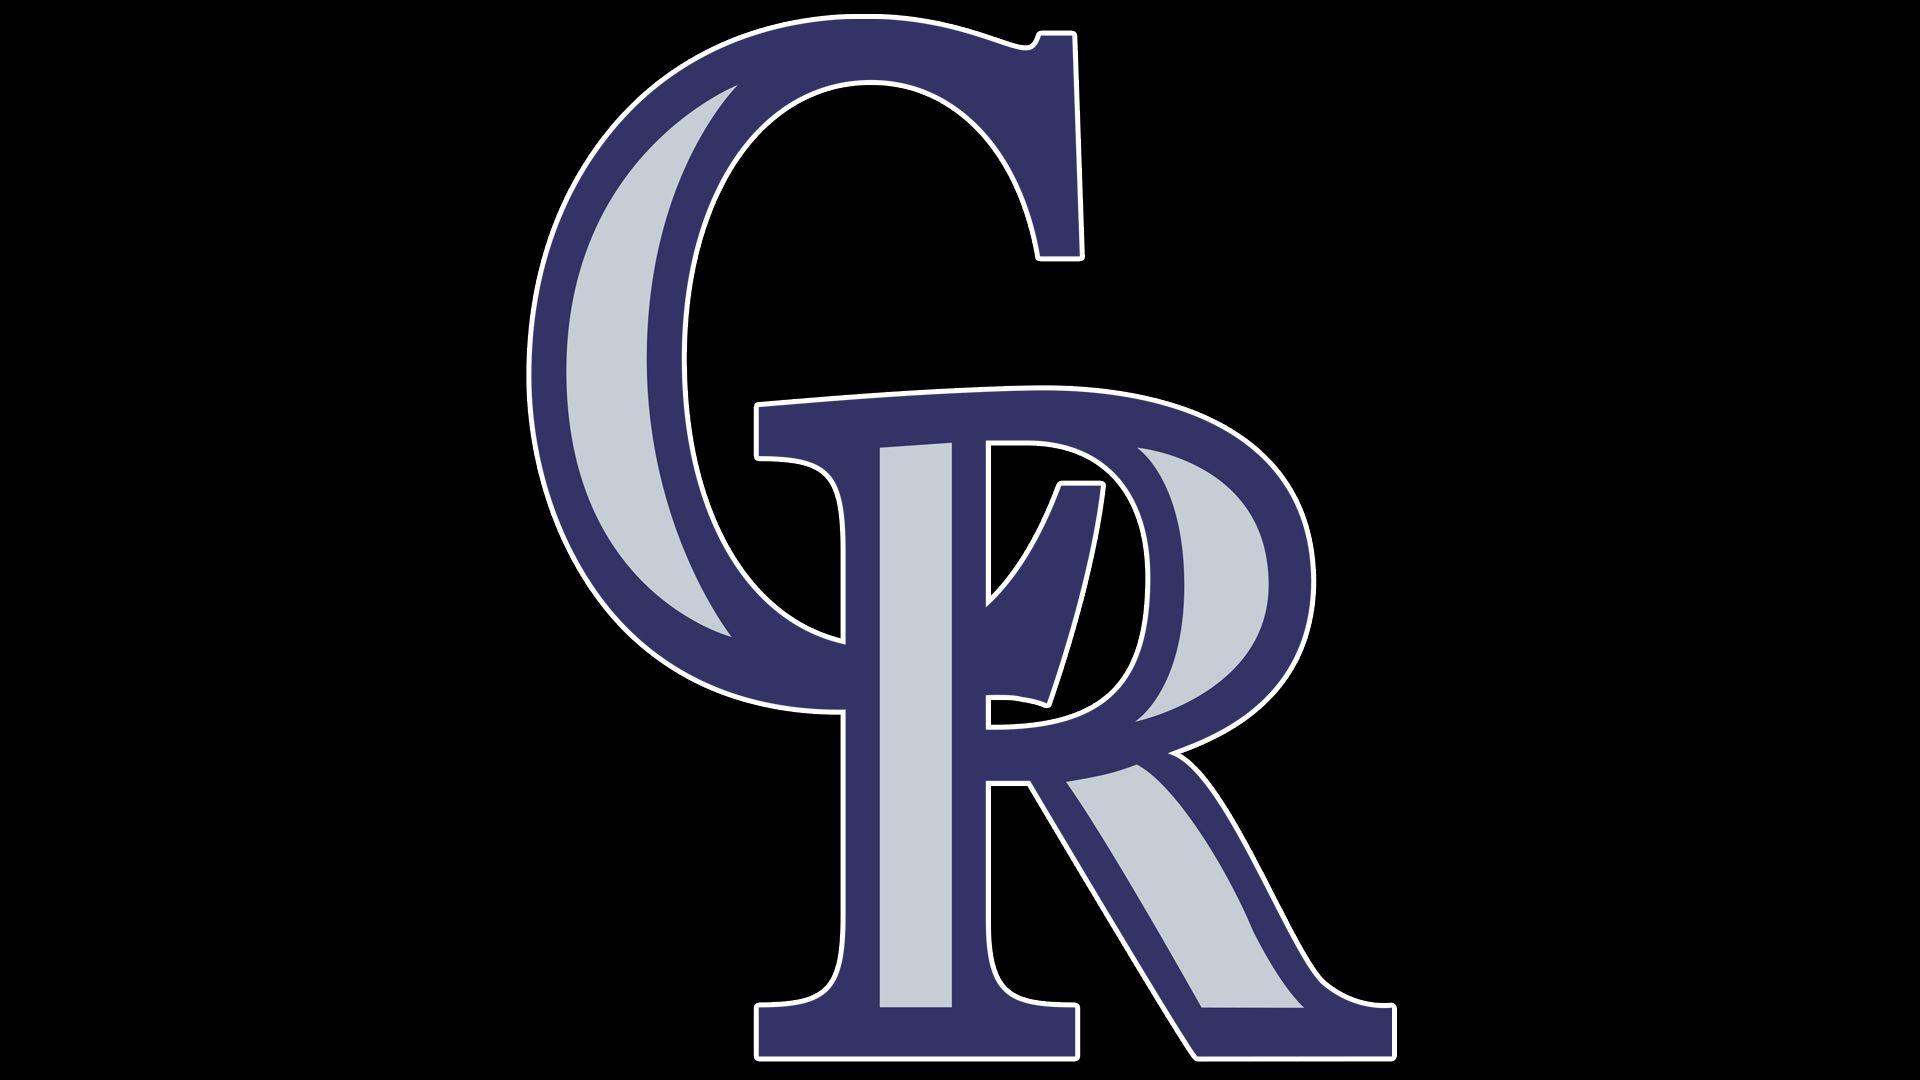 Colorado Rockies Logo - Colorado Rockies Logo, Colorado Rockies Symbol, Meaning, History and ...